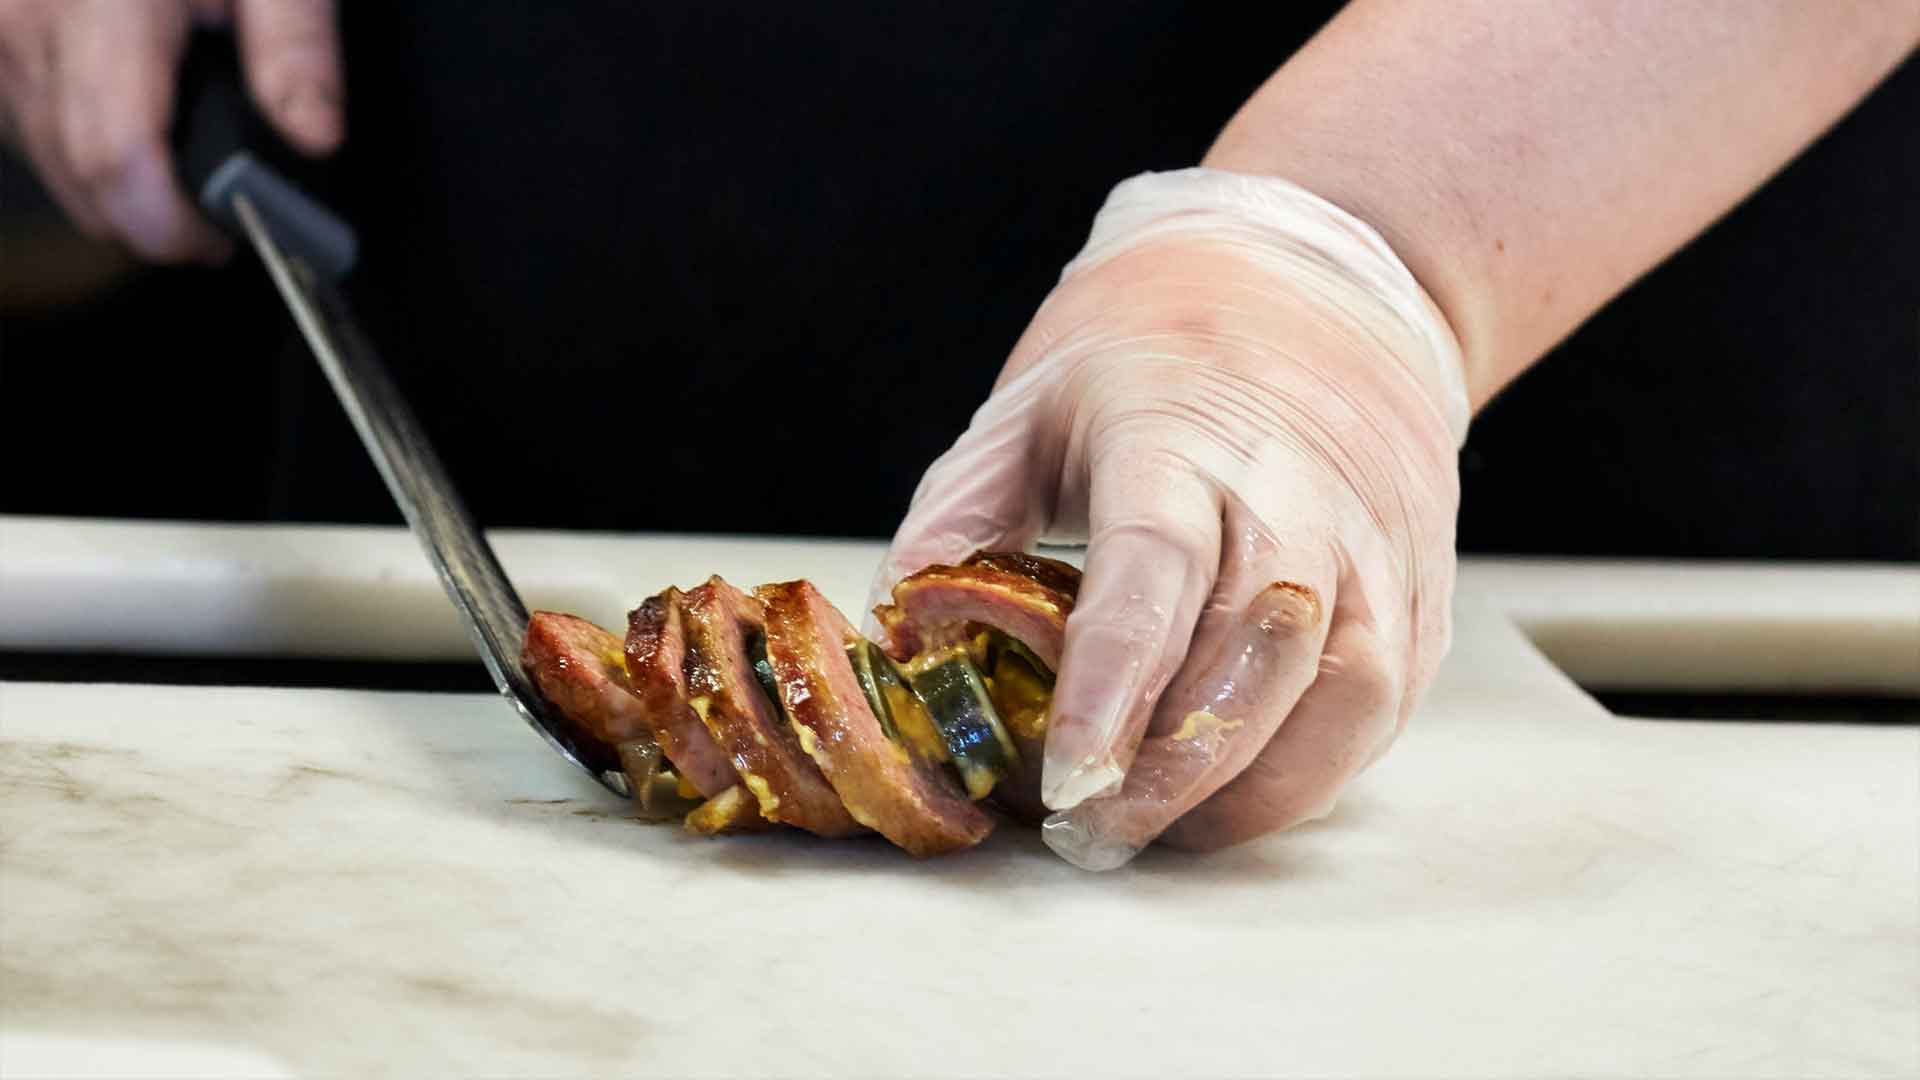 Mout-watering food photography of a line cook slicing up a delicious sausage slammer from Southside Market & Barbeque